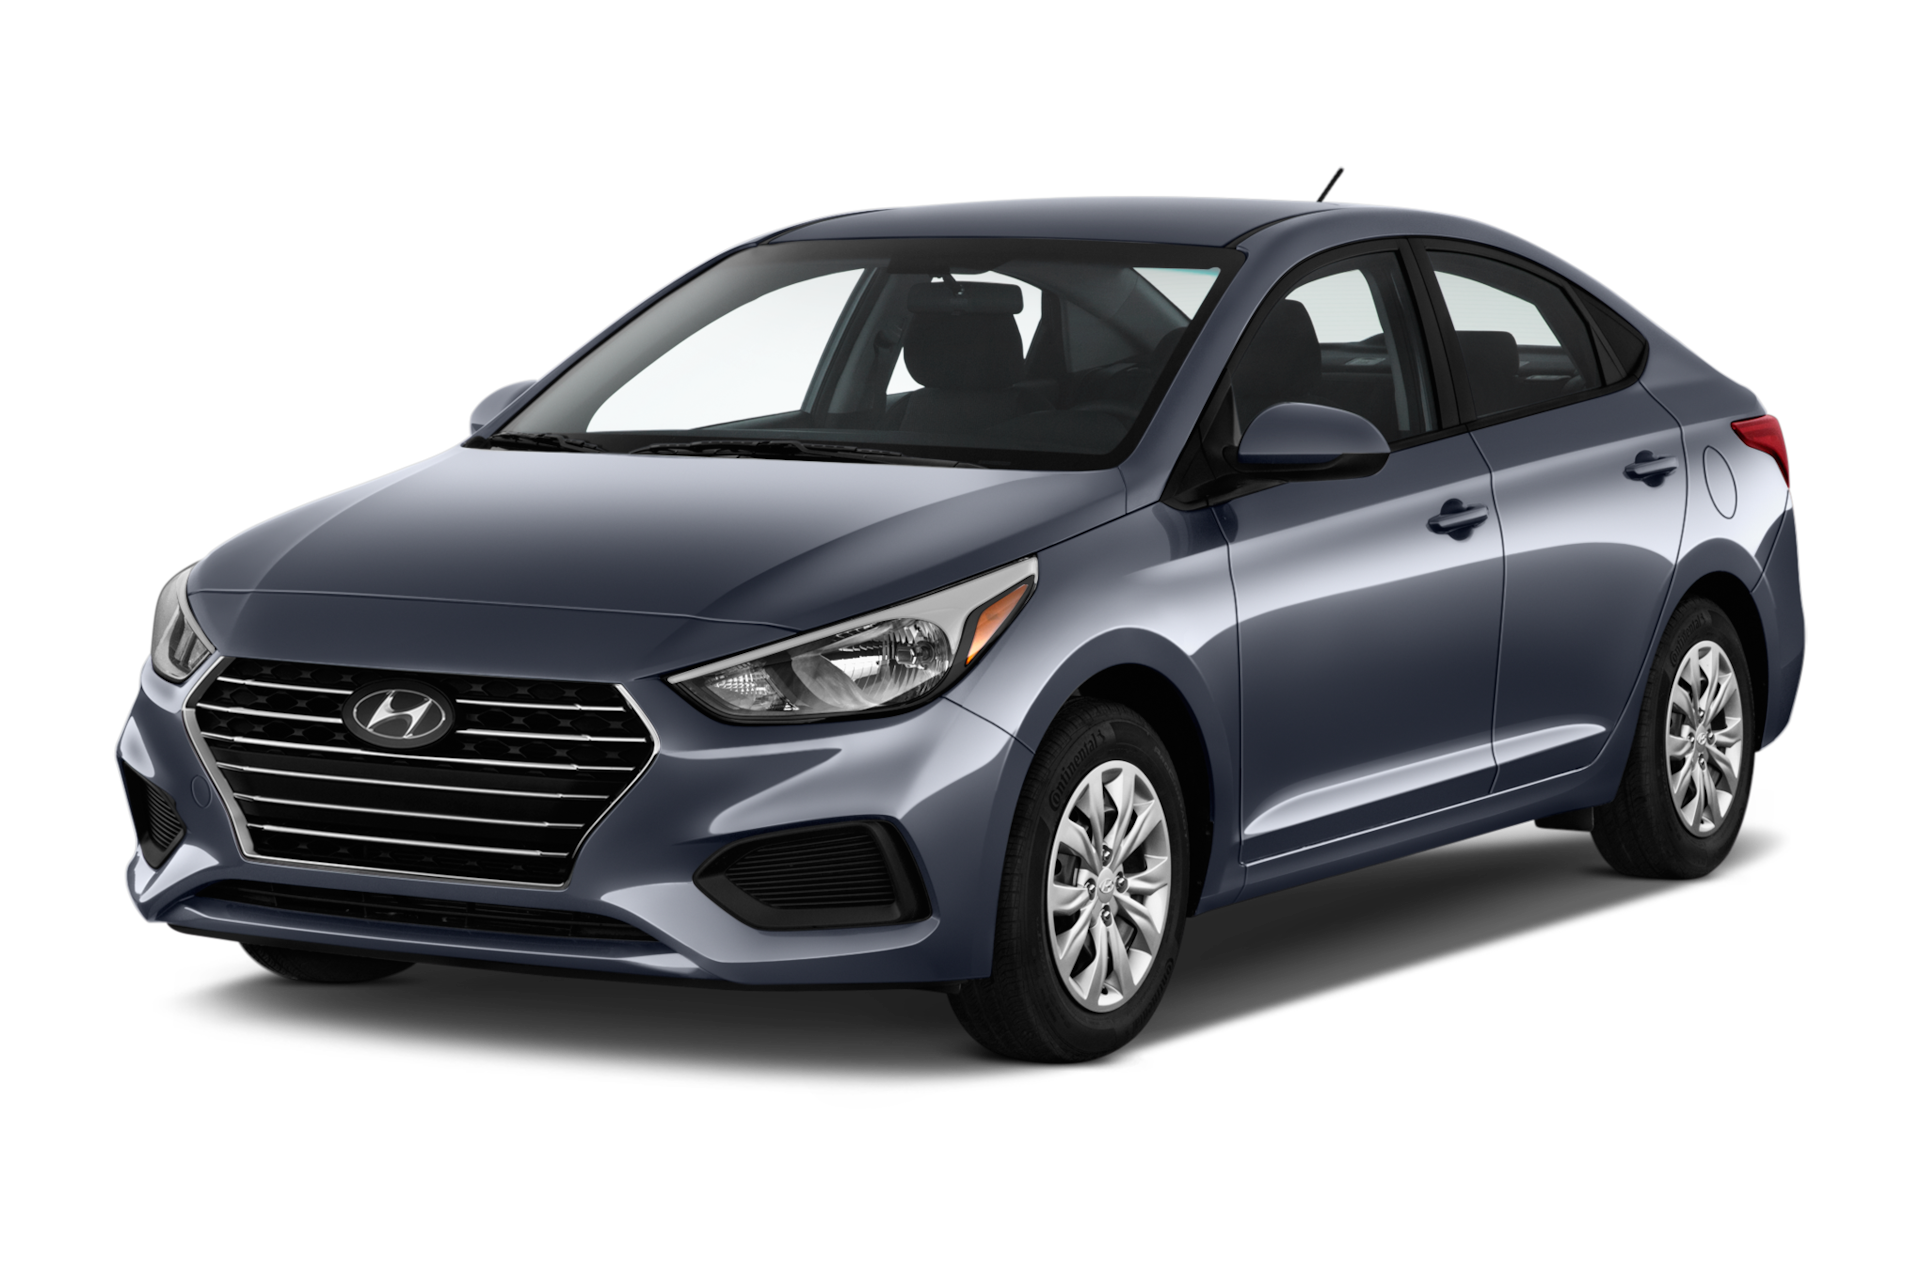 2019 Hyundai Accent Prices, Reviews, and Photos - MotorTrend